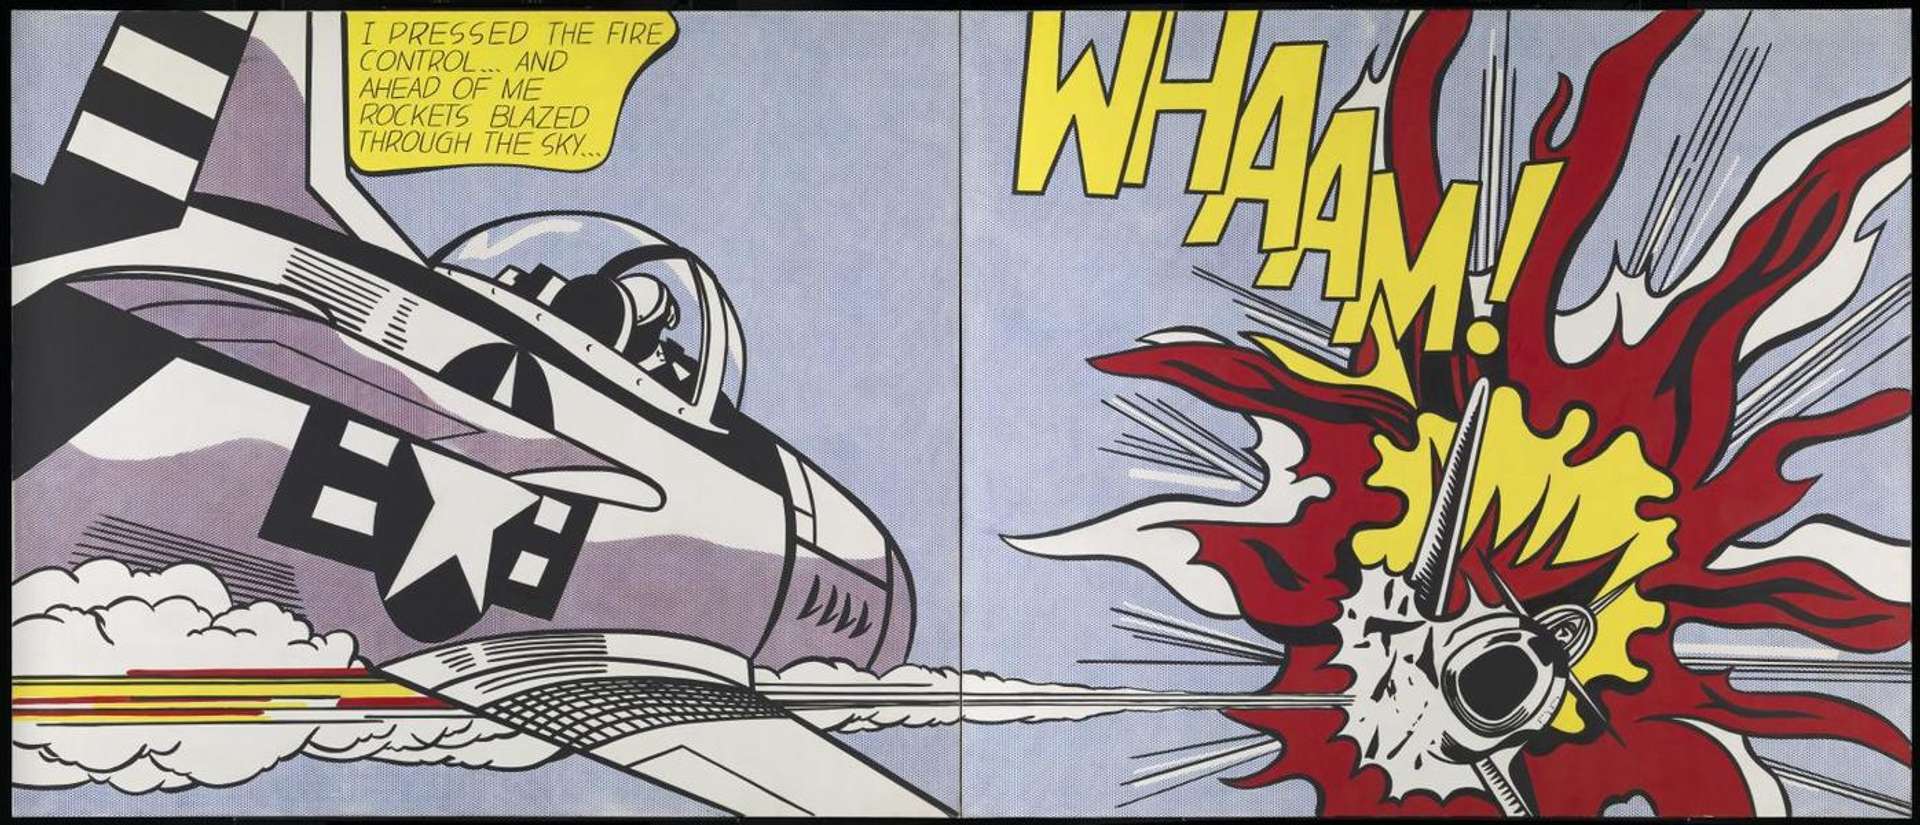 An image of the diptych Whaam! by Roy Lichtenstein. It shows a war plane, with a speech balloon saying "I pressed the fire control... and ahead of me rockets blazed through the sky...", as it heads towards an explosion with the word Whaam! overlaid.